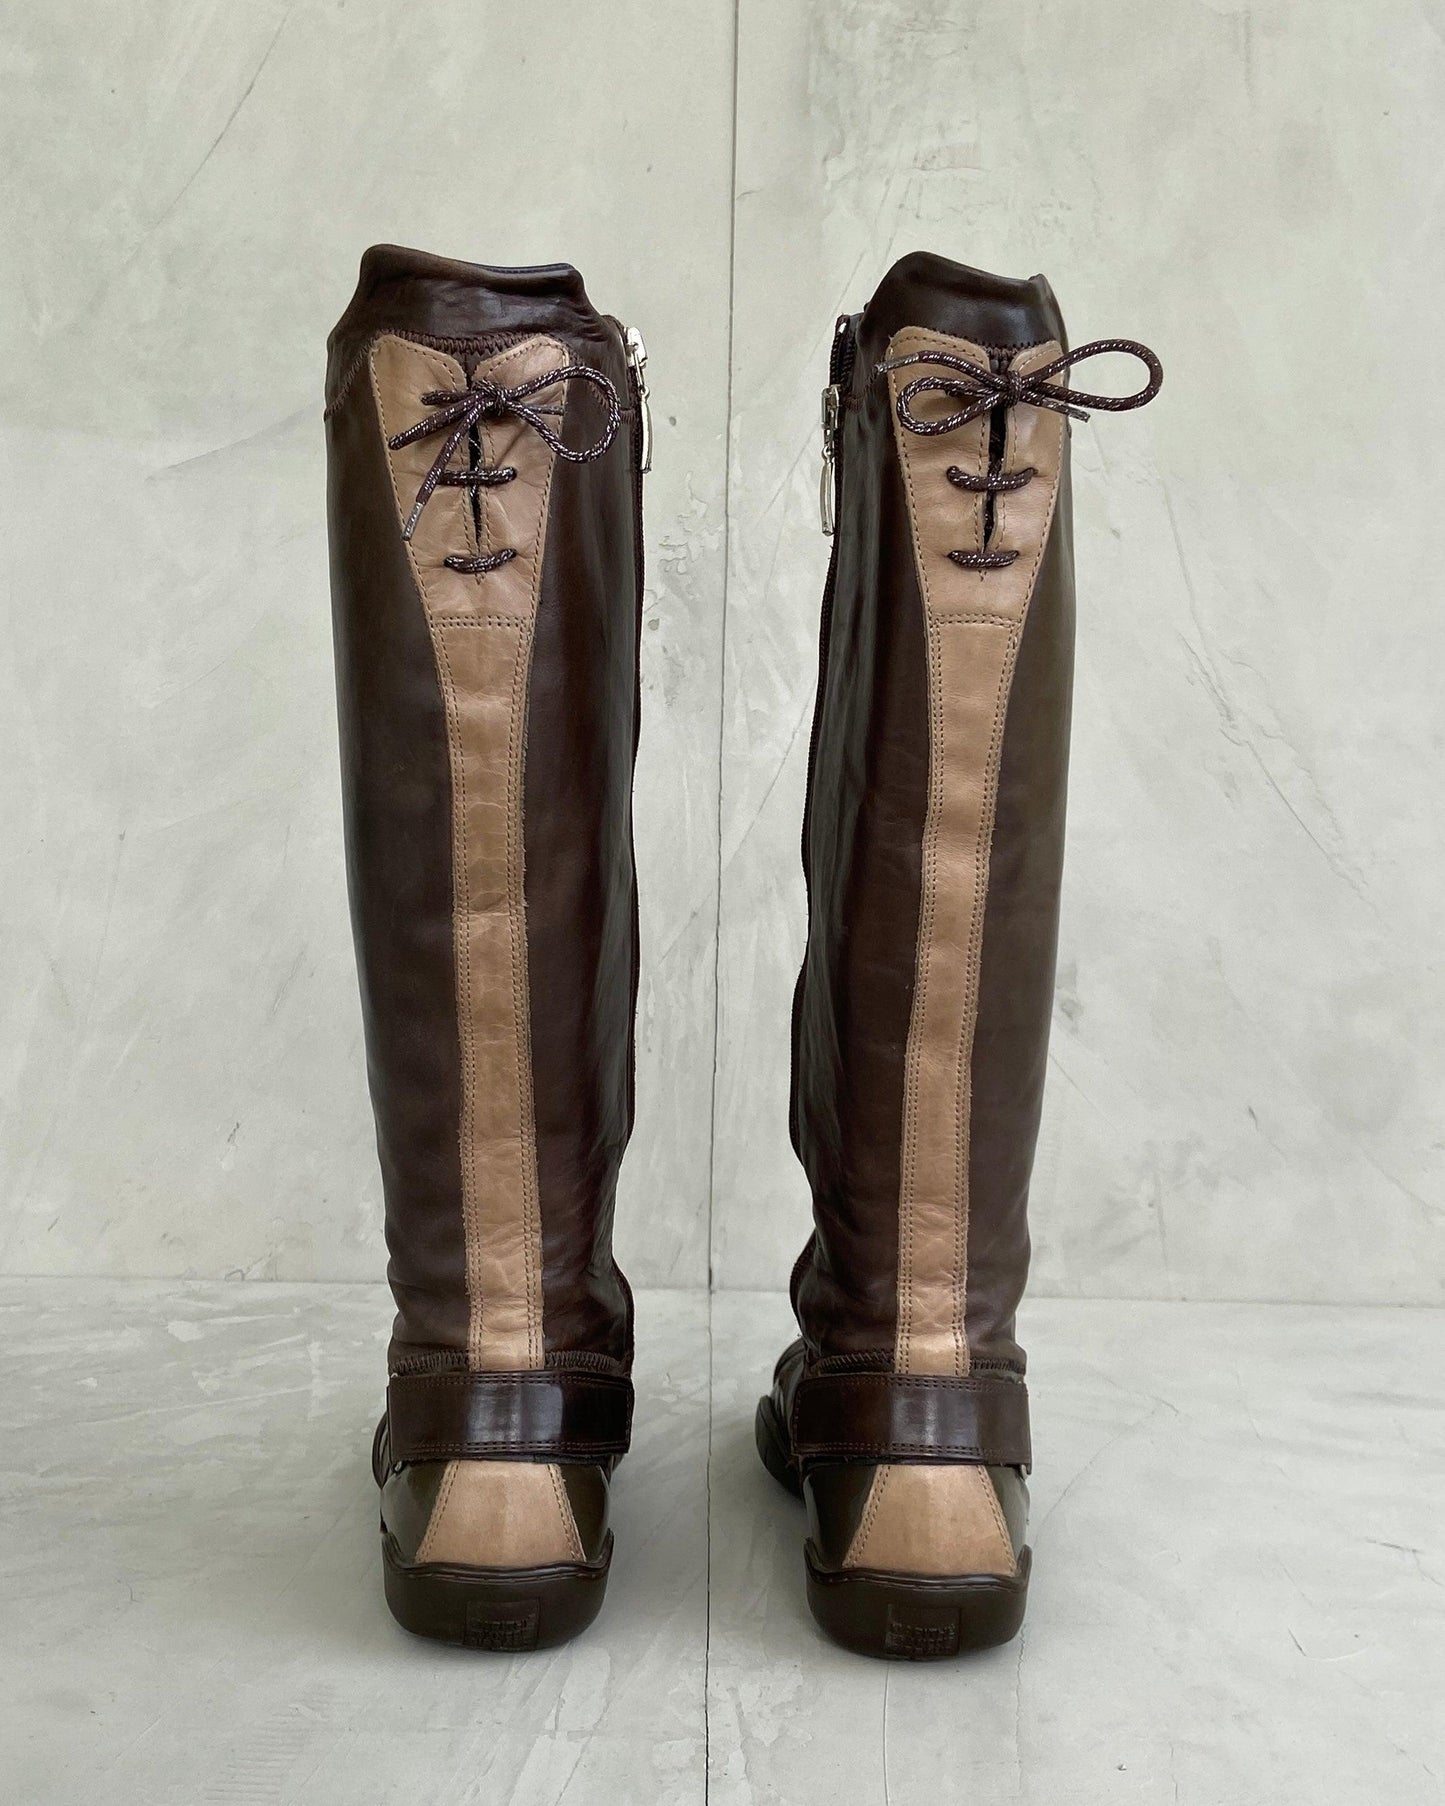 MARITHE FRANCOIS GIRBAUD MFG LEATHER LACE UP BOOTS - EU 40 / UK 7 - Known Source